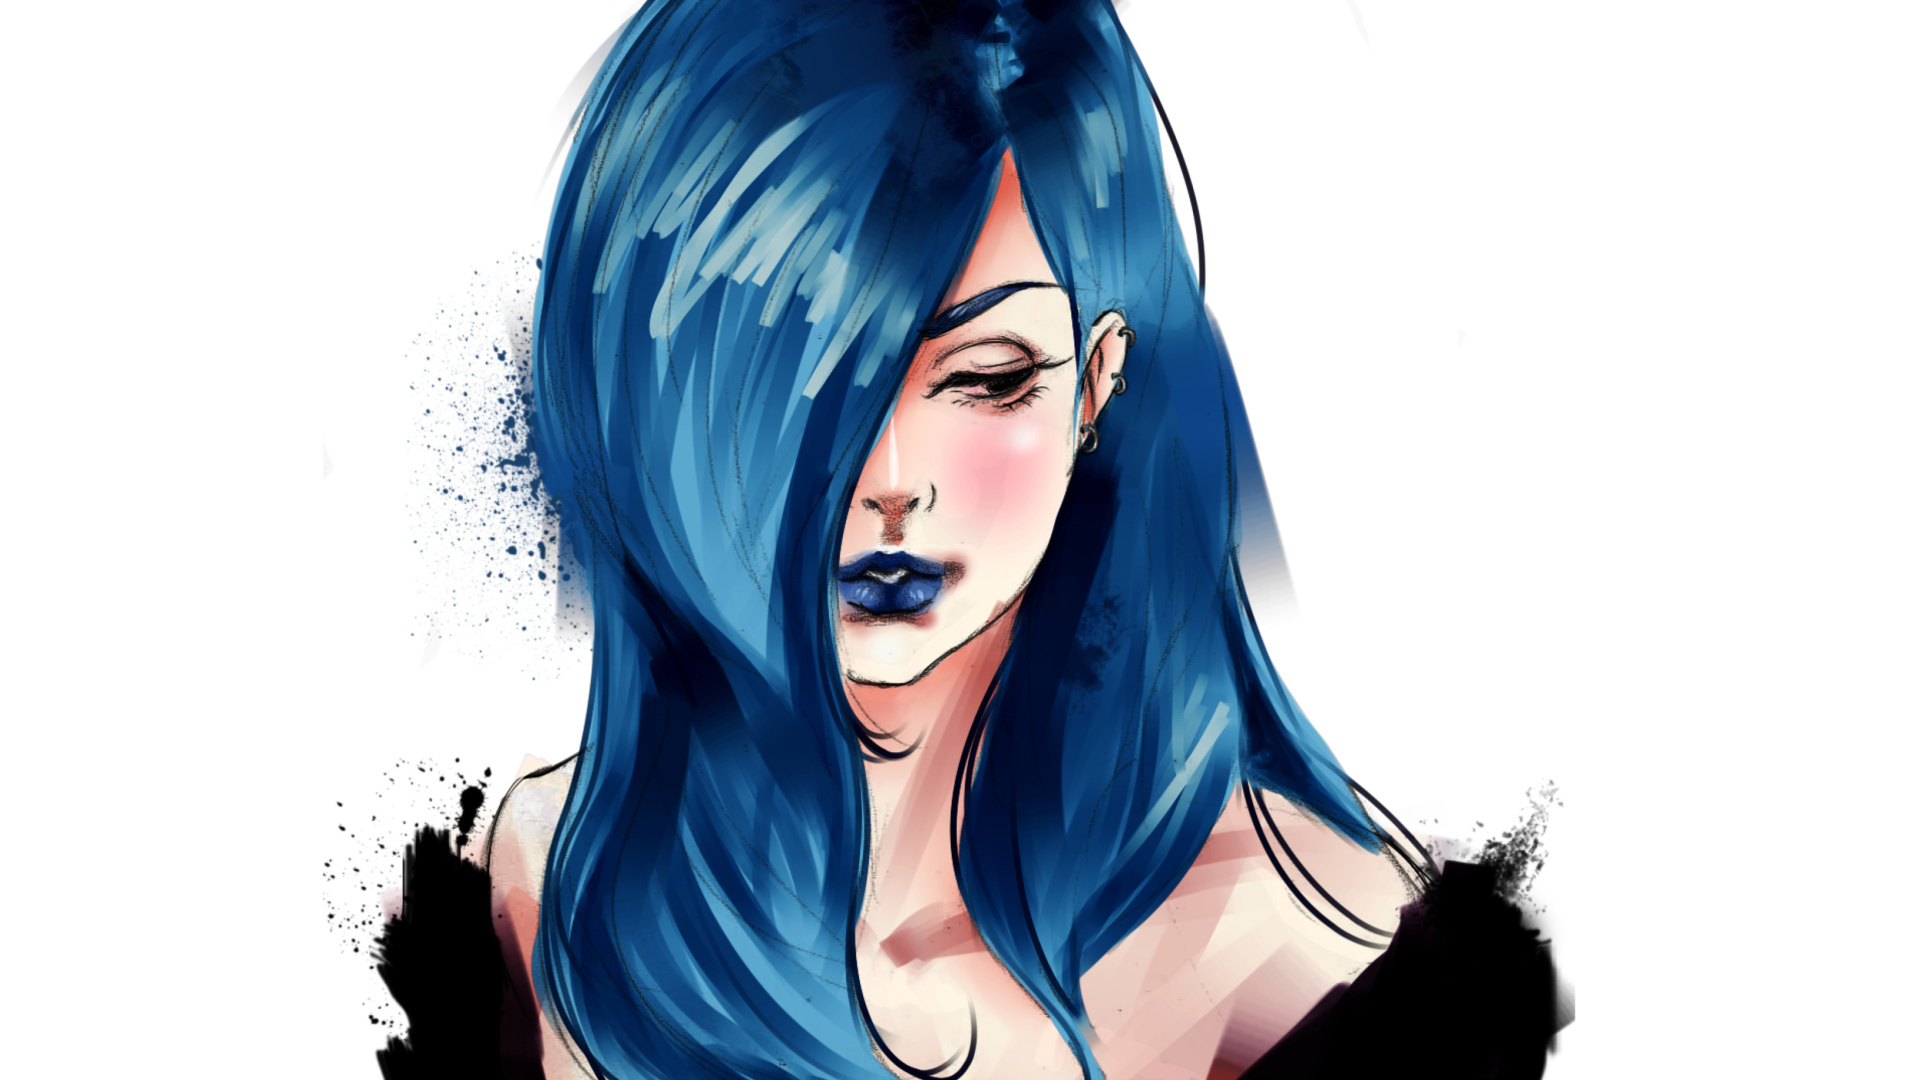 Girl With Blue Hair Painting screenshot #1 1920x1080